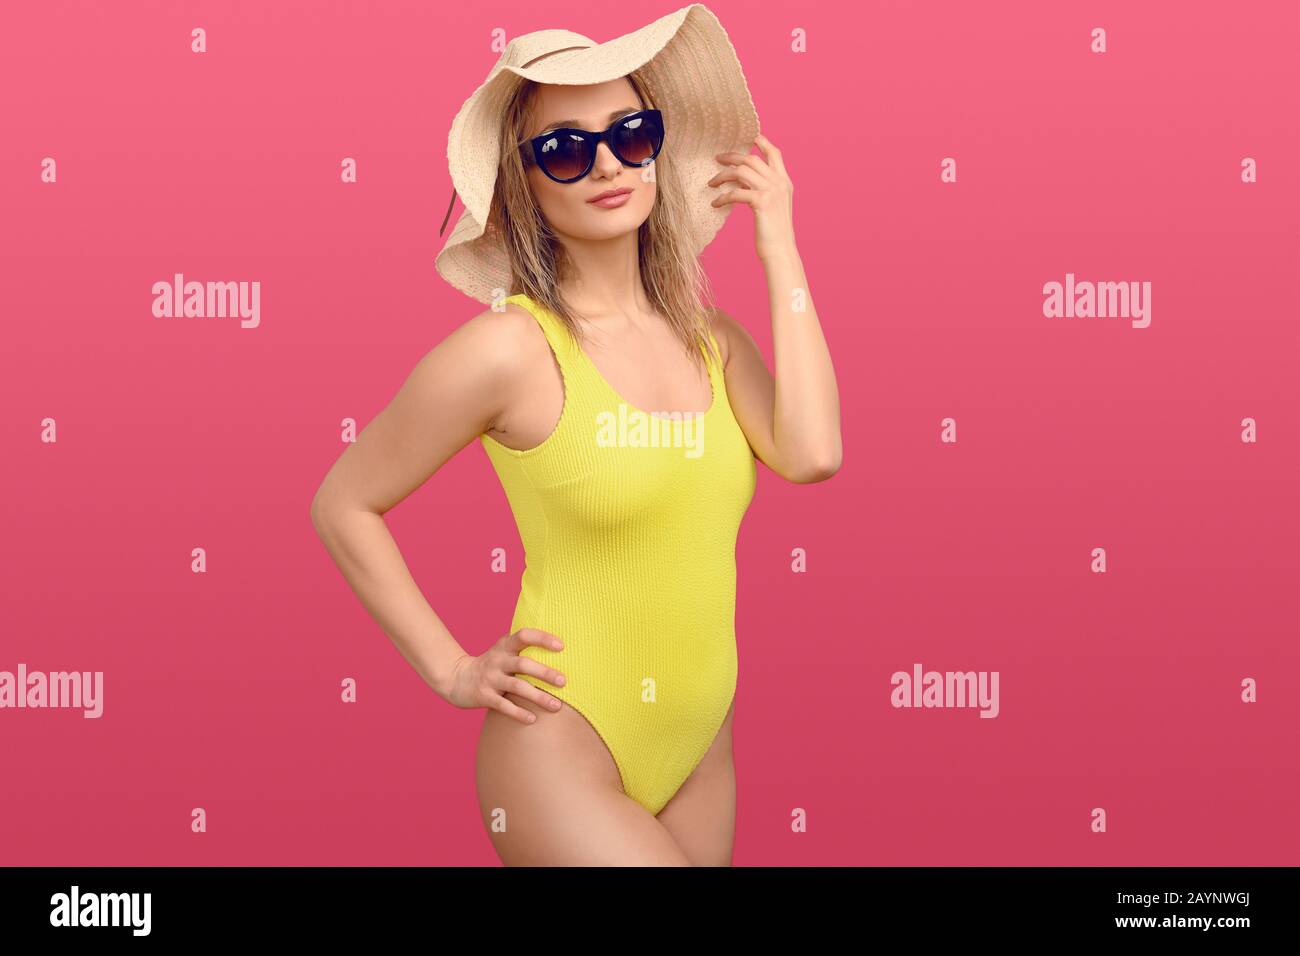 Trendy sexy young blond woman in a yellow swimsuit, floppy straw sunhat and sunglasses posing over a pink studio background with hand on hip in a thre Stock Photo